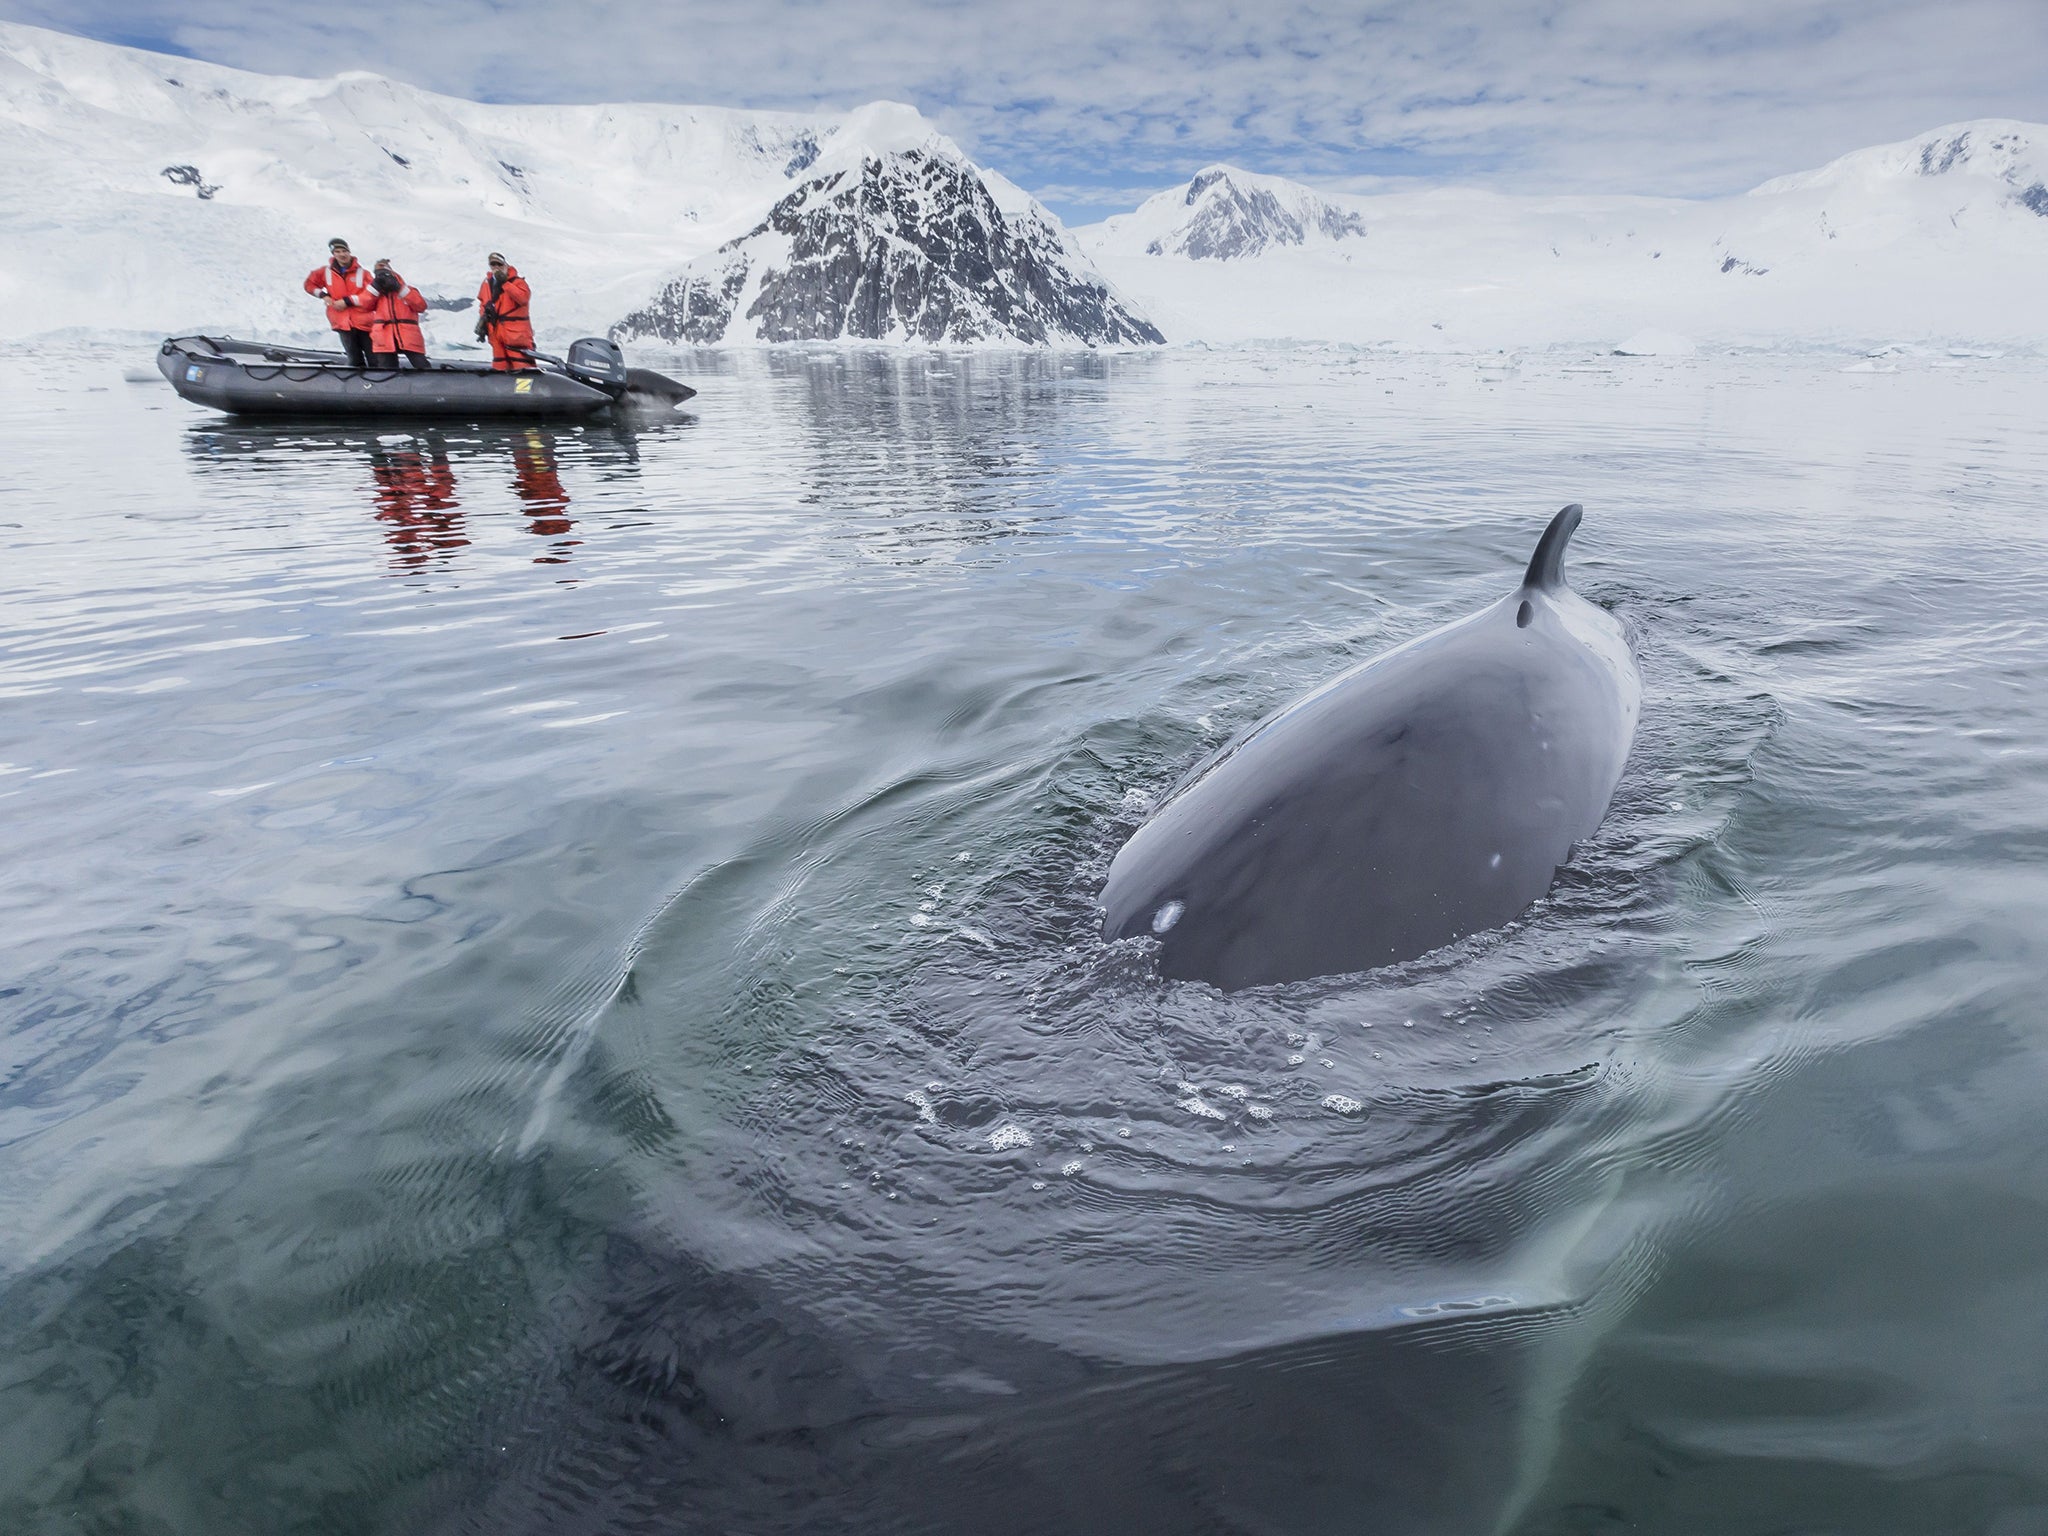 Minke whales are one of the protected species that live in the Ross Sea